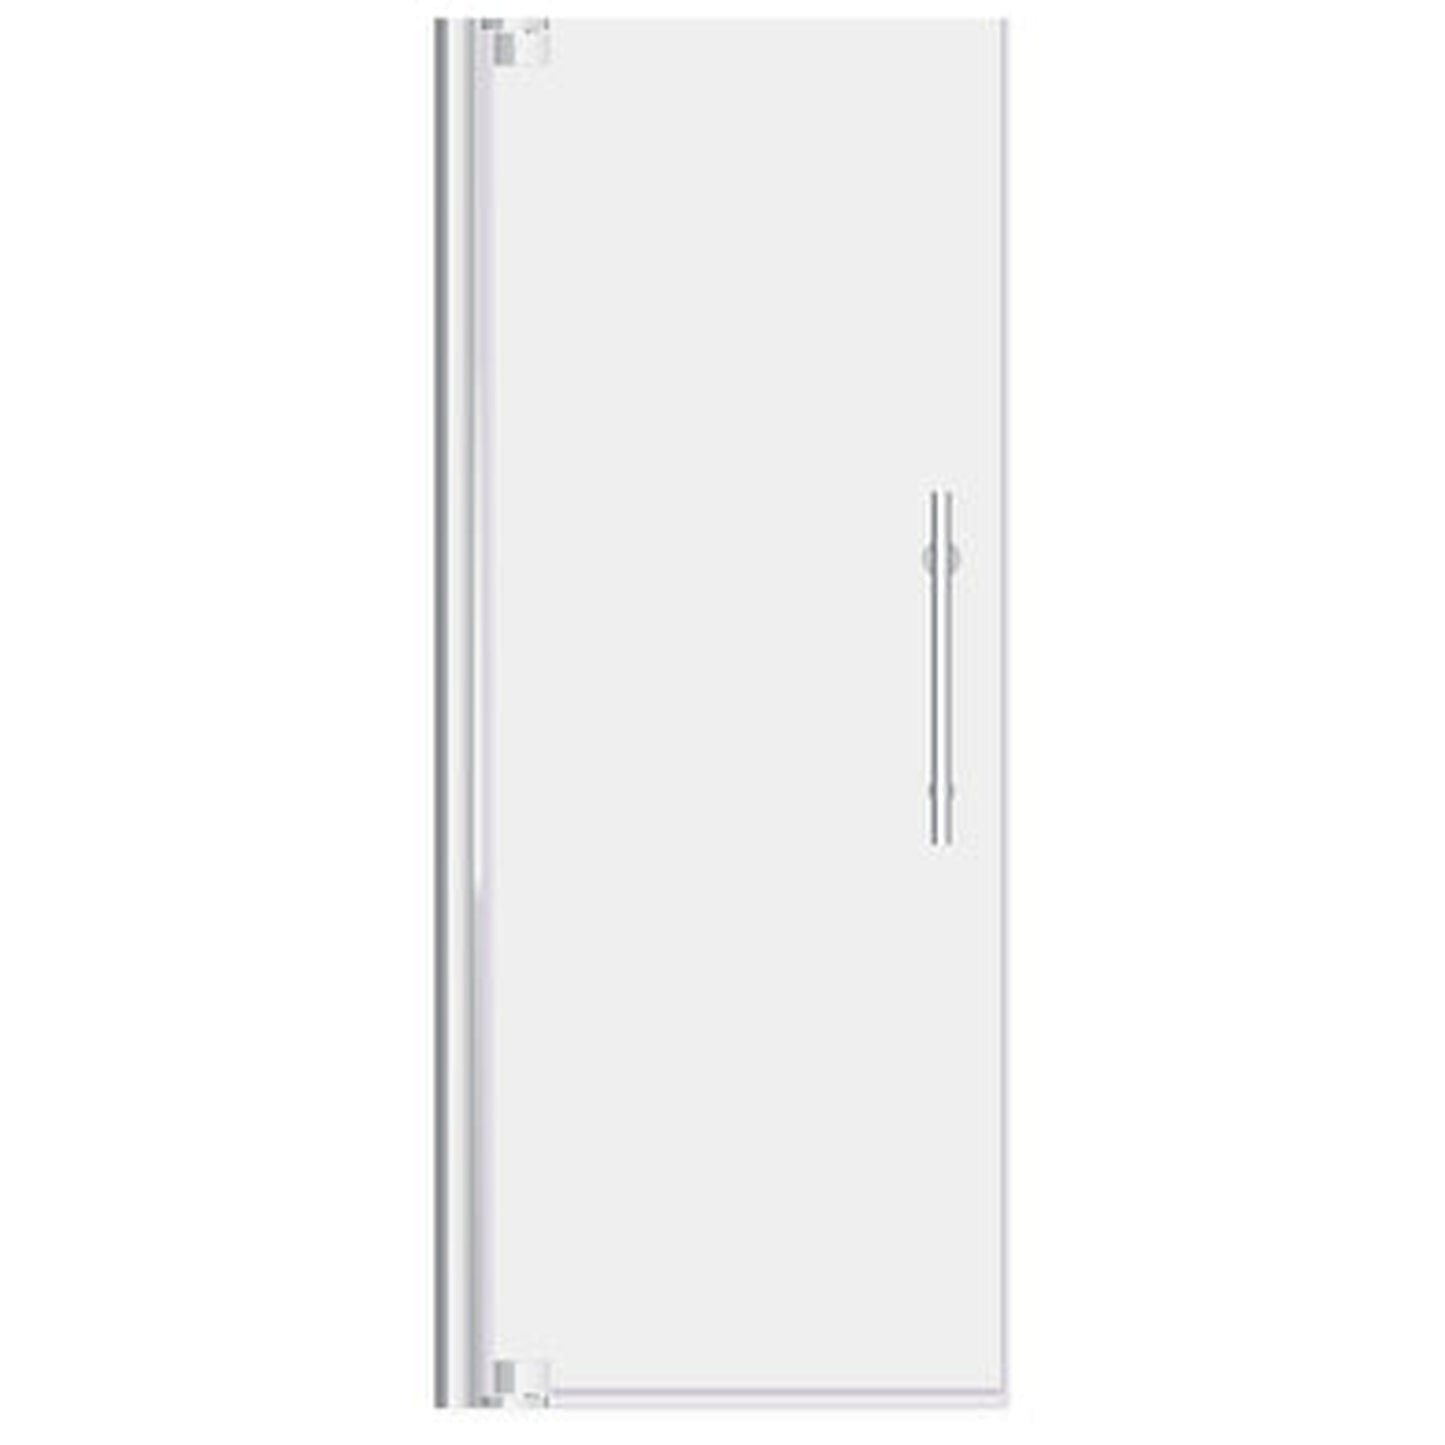 LessCare Ultra-G 34-35" x 72" Chrome Swing-Out Shower Door